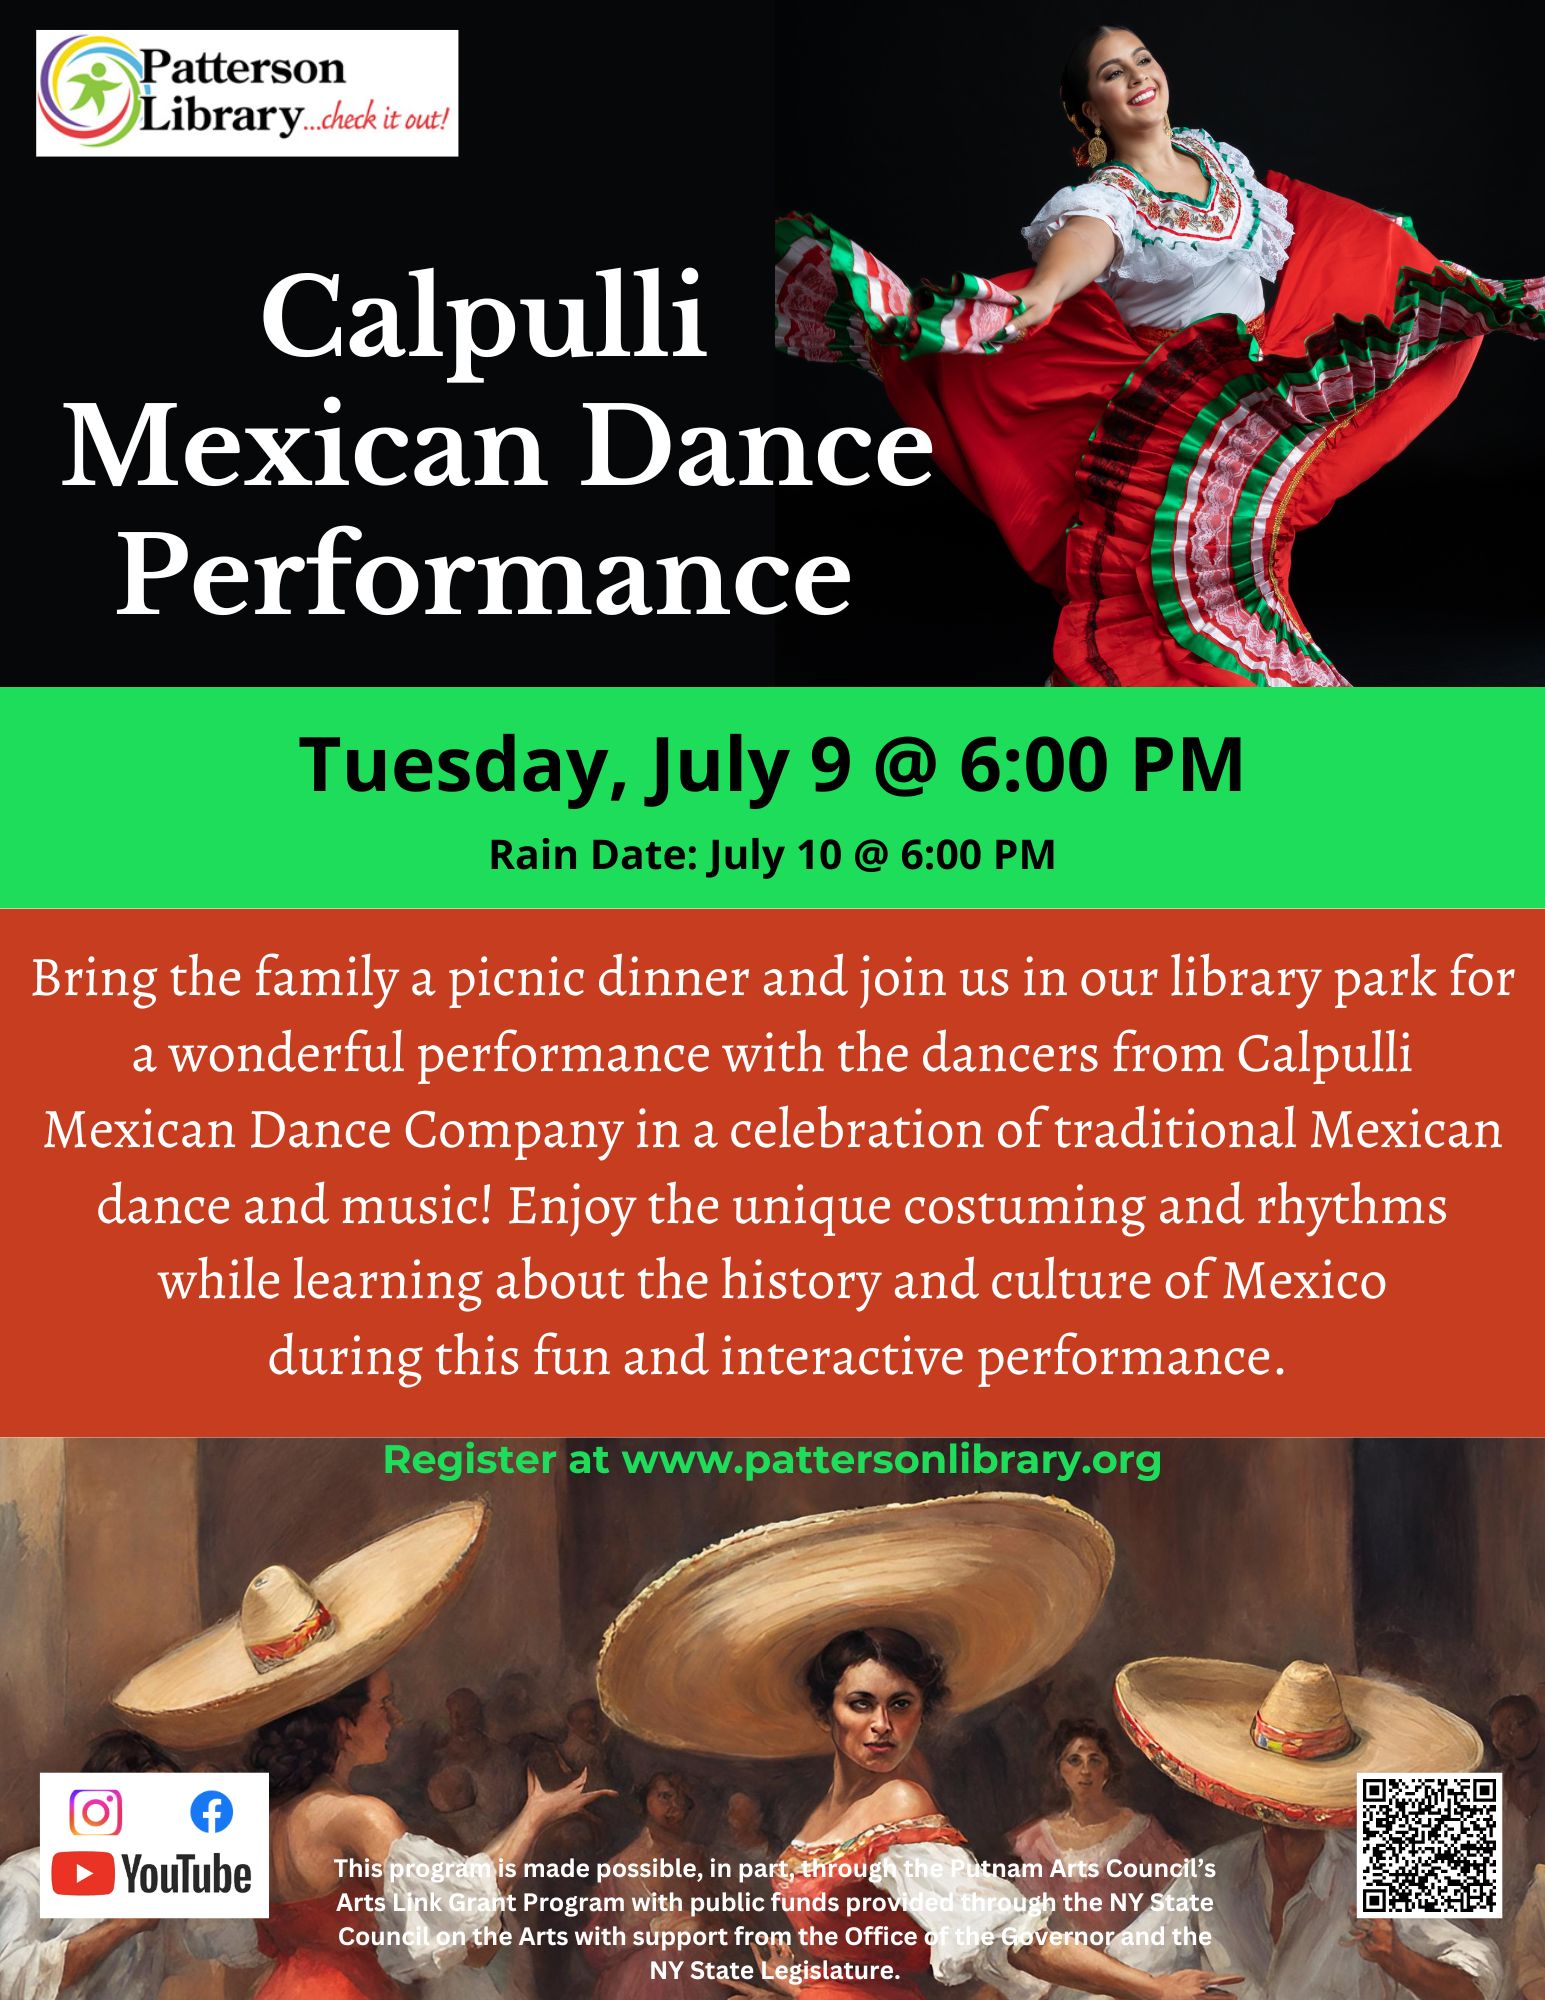 Calpulli Mexican Dance Performance in the Park